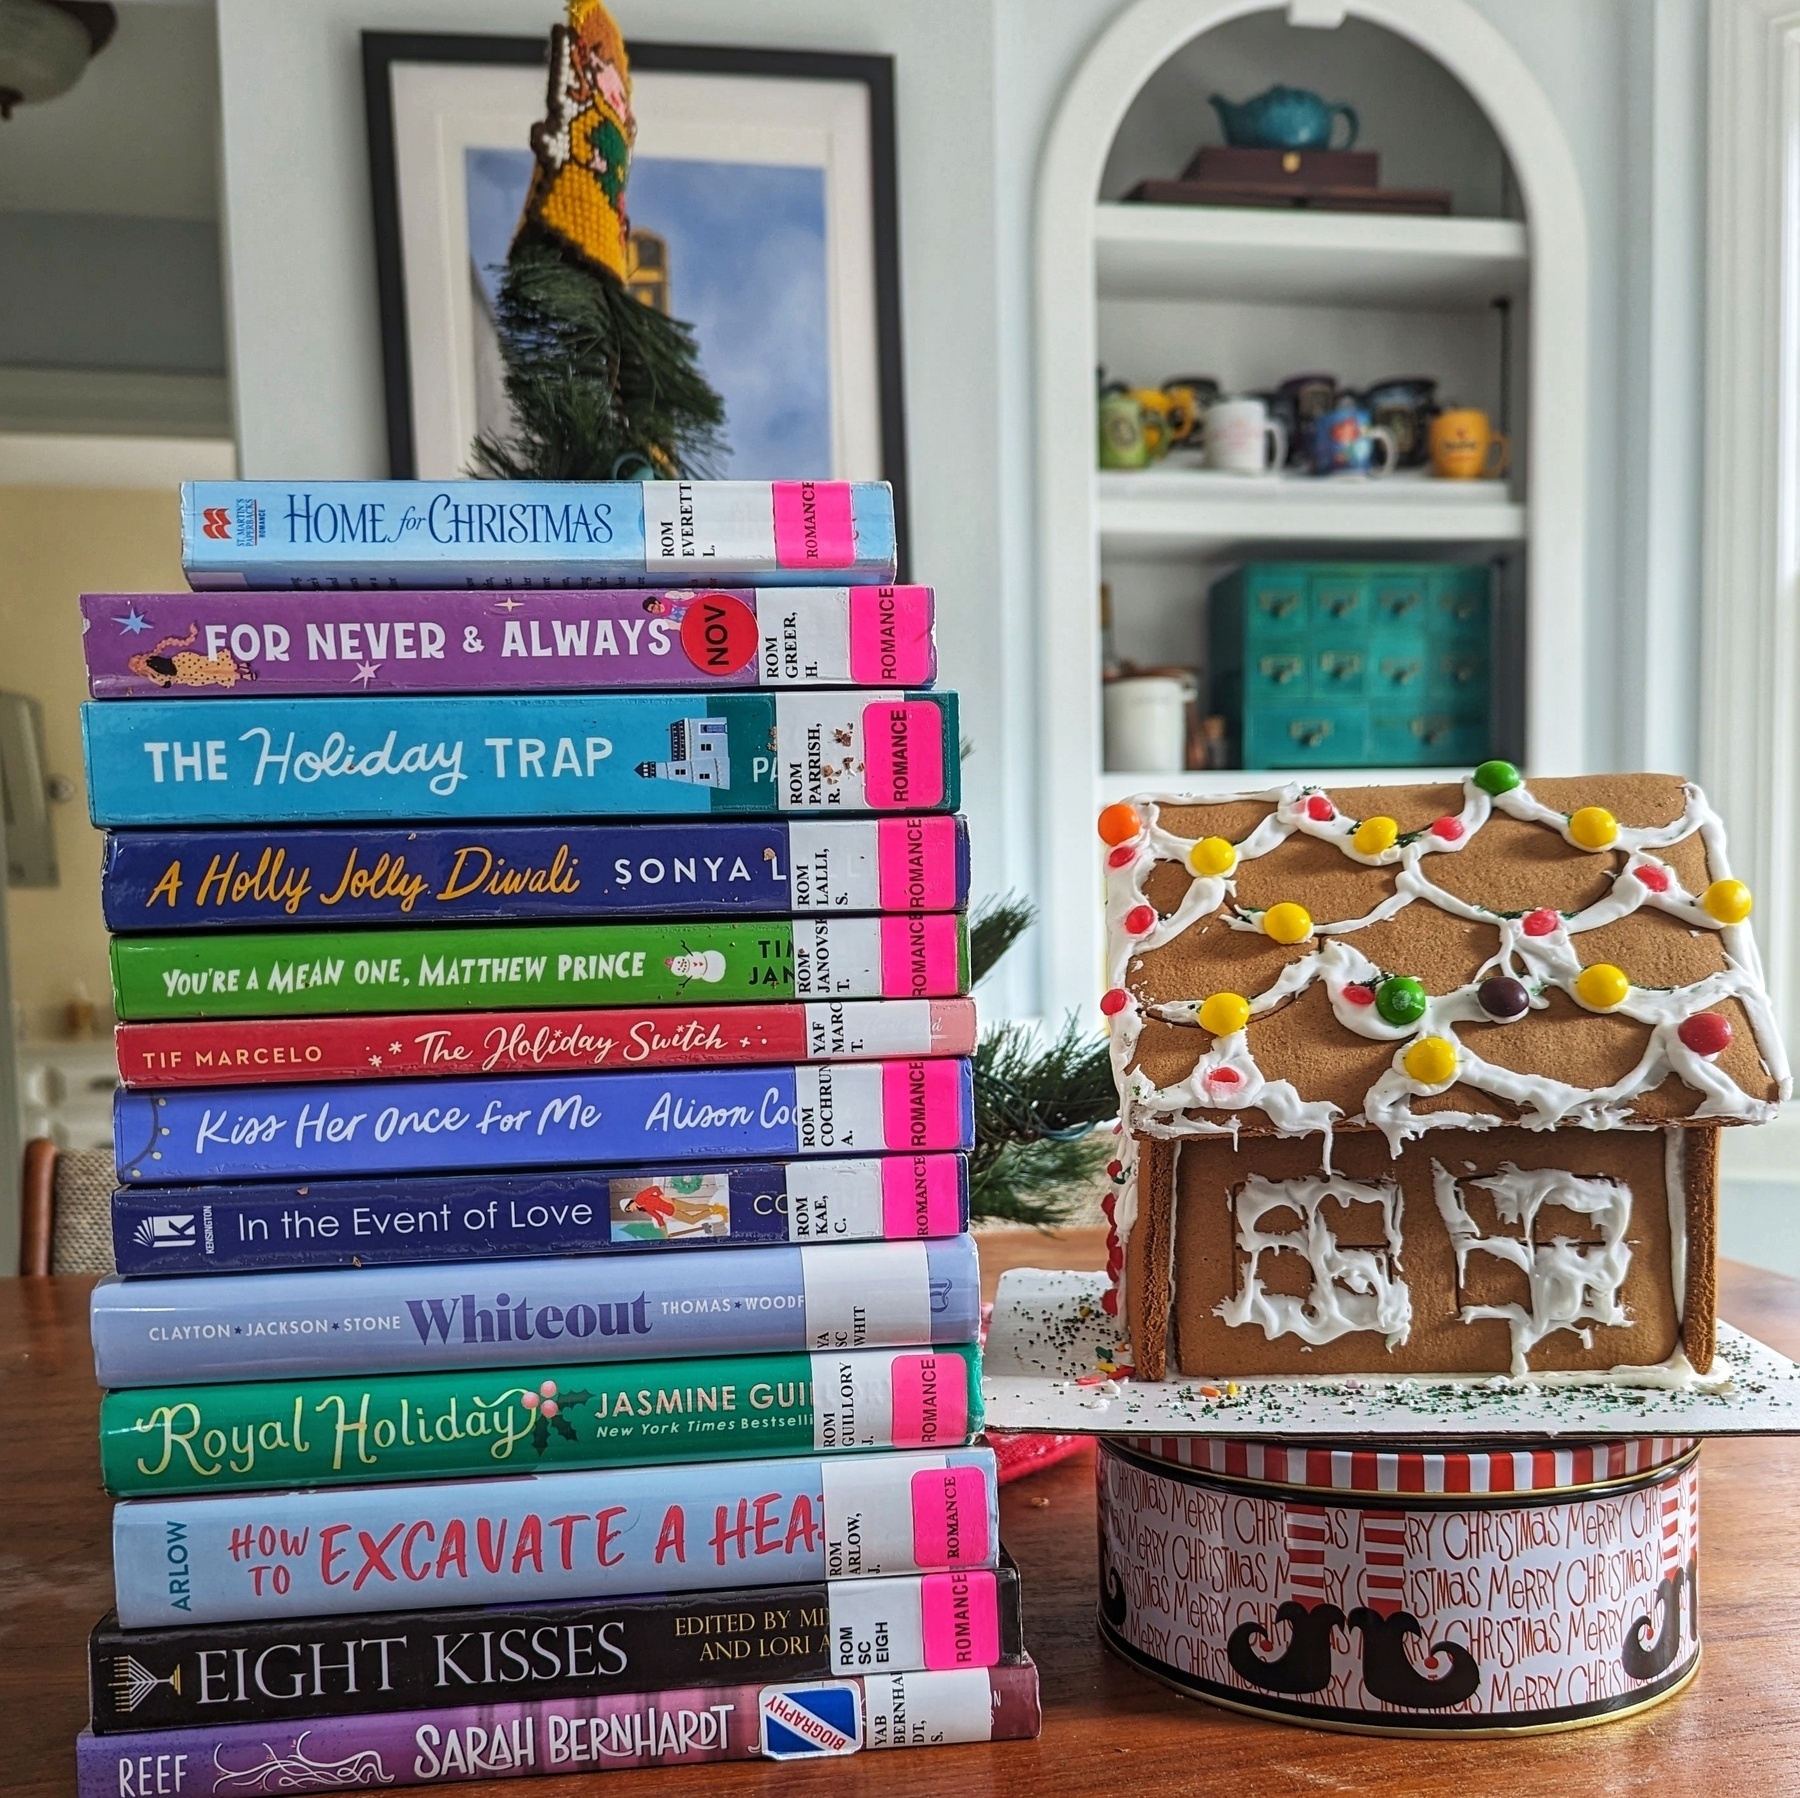 A stack of holiday romance novels sitting on top of a biography of Sarah Bernhardt, next to a gingerbread house that's sitting on top of a holiday tin.